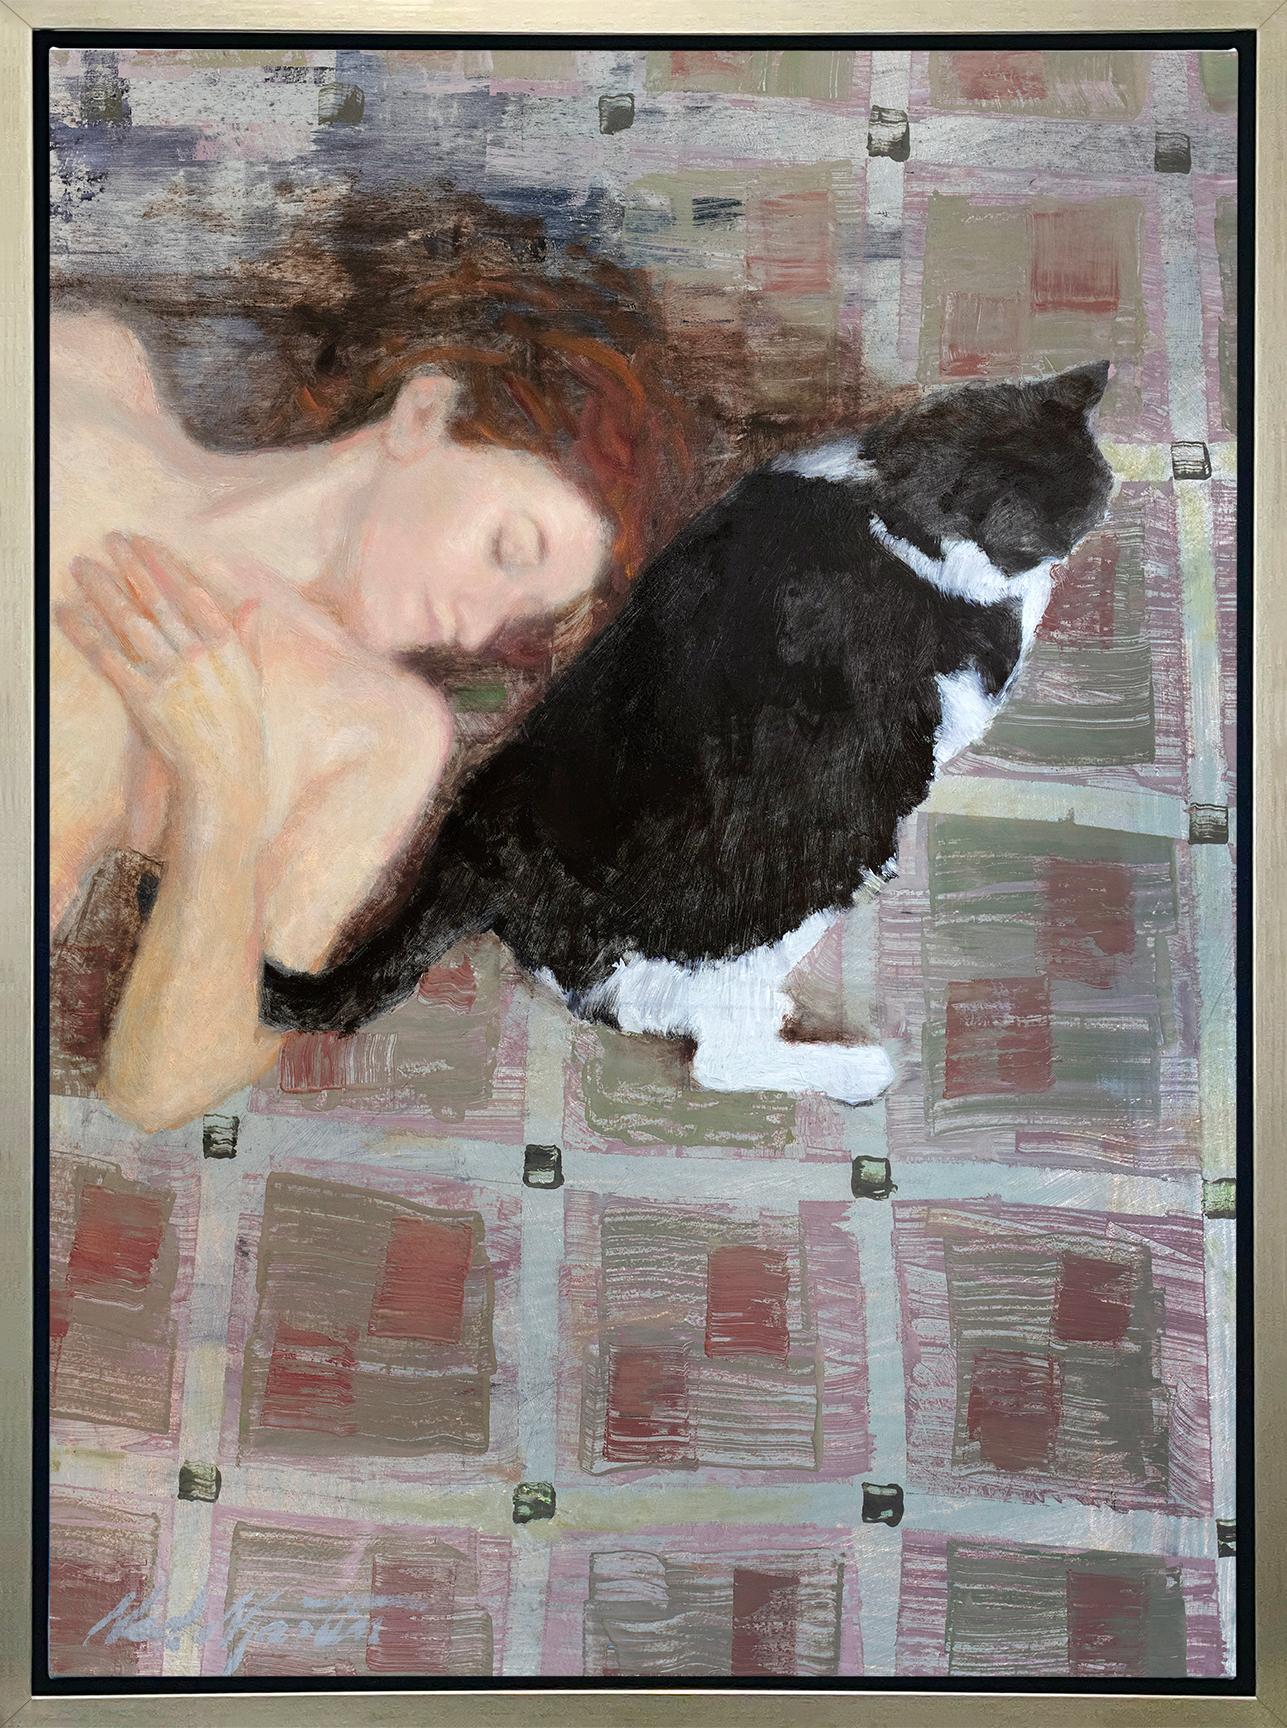 Ned Martin Figurative Print - "Lazy Day, " Framed Limited Edition Giclee Print, 40" x 30"